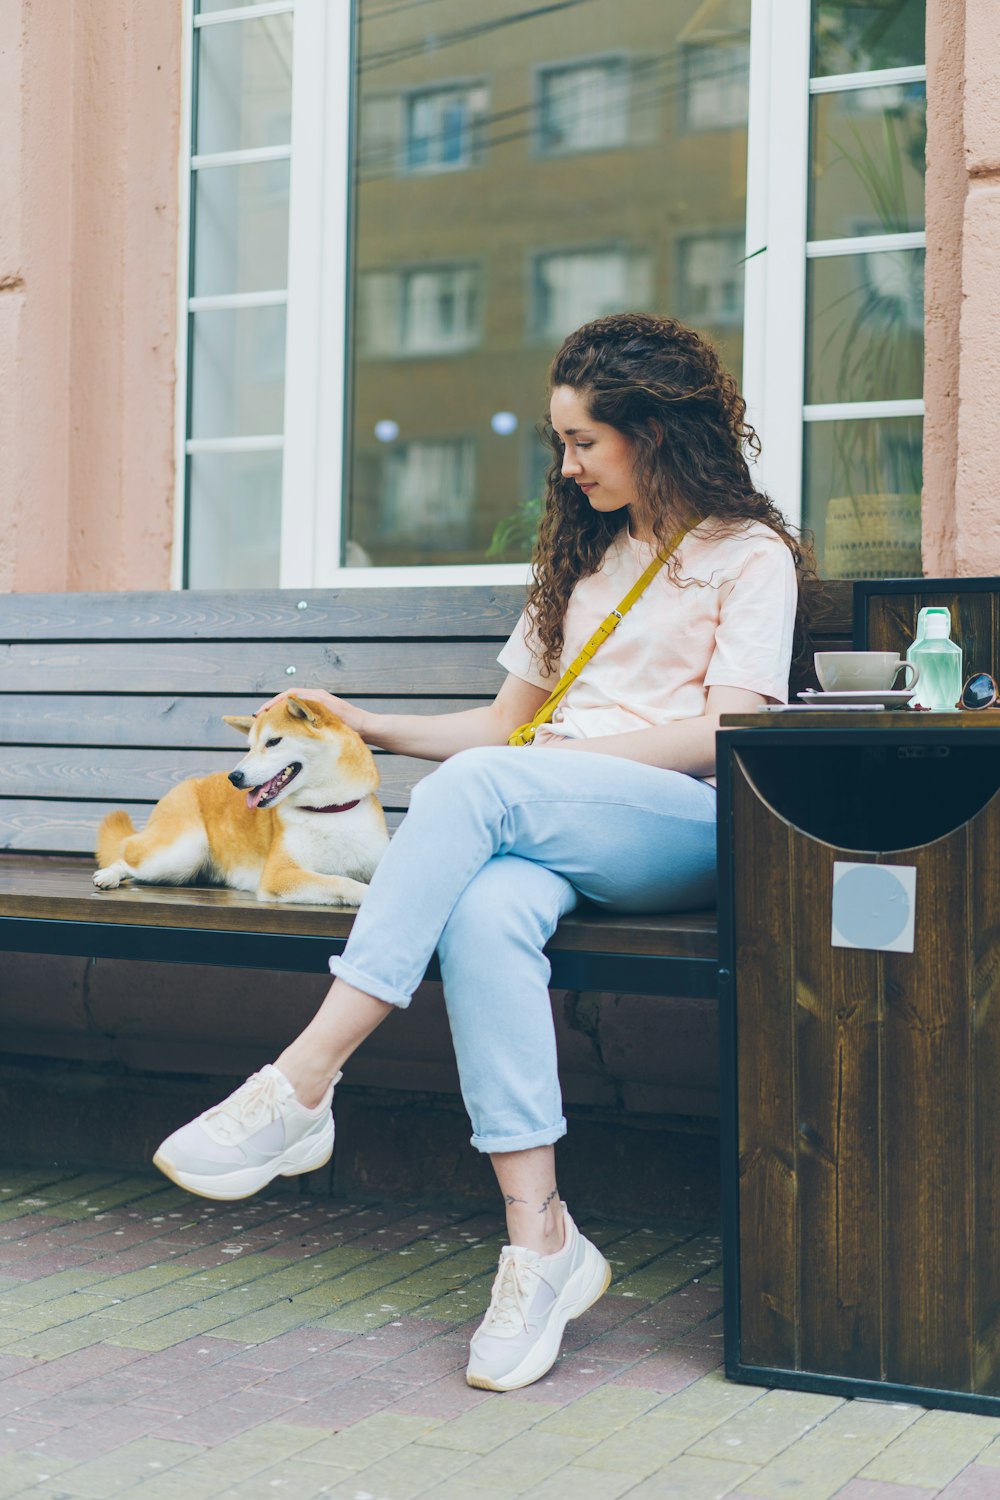 a woman sitting on a bench next to a dog